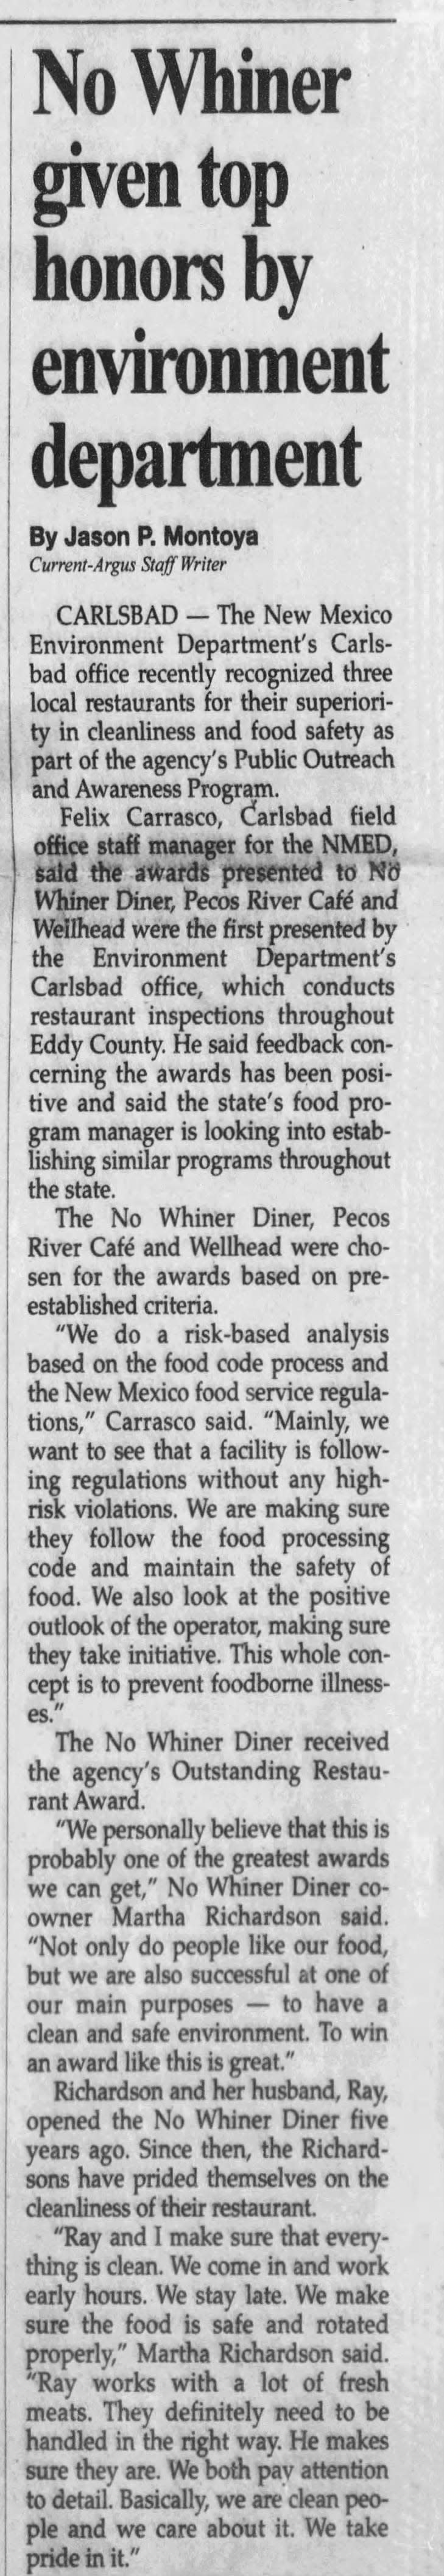 A Carlsbad Current-Argus clipping shows Pecos Rive Cafe being honored for its cleanliness by the State of New Mexico, Dec. 29, 2004